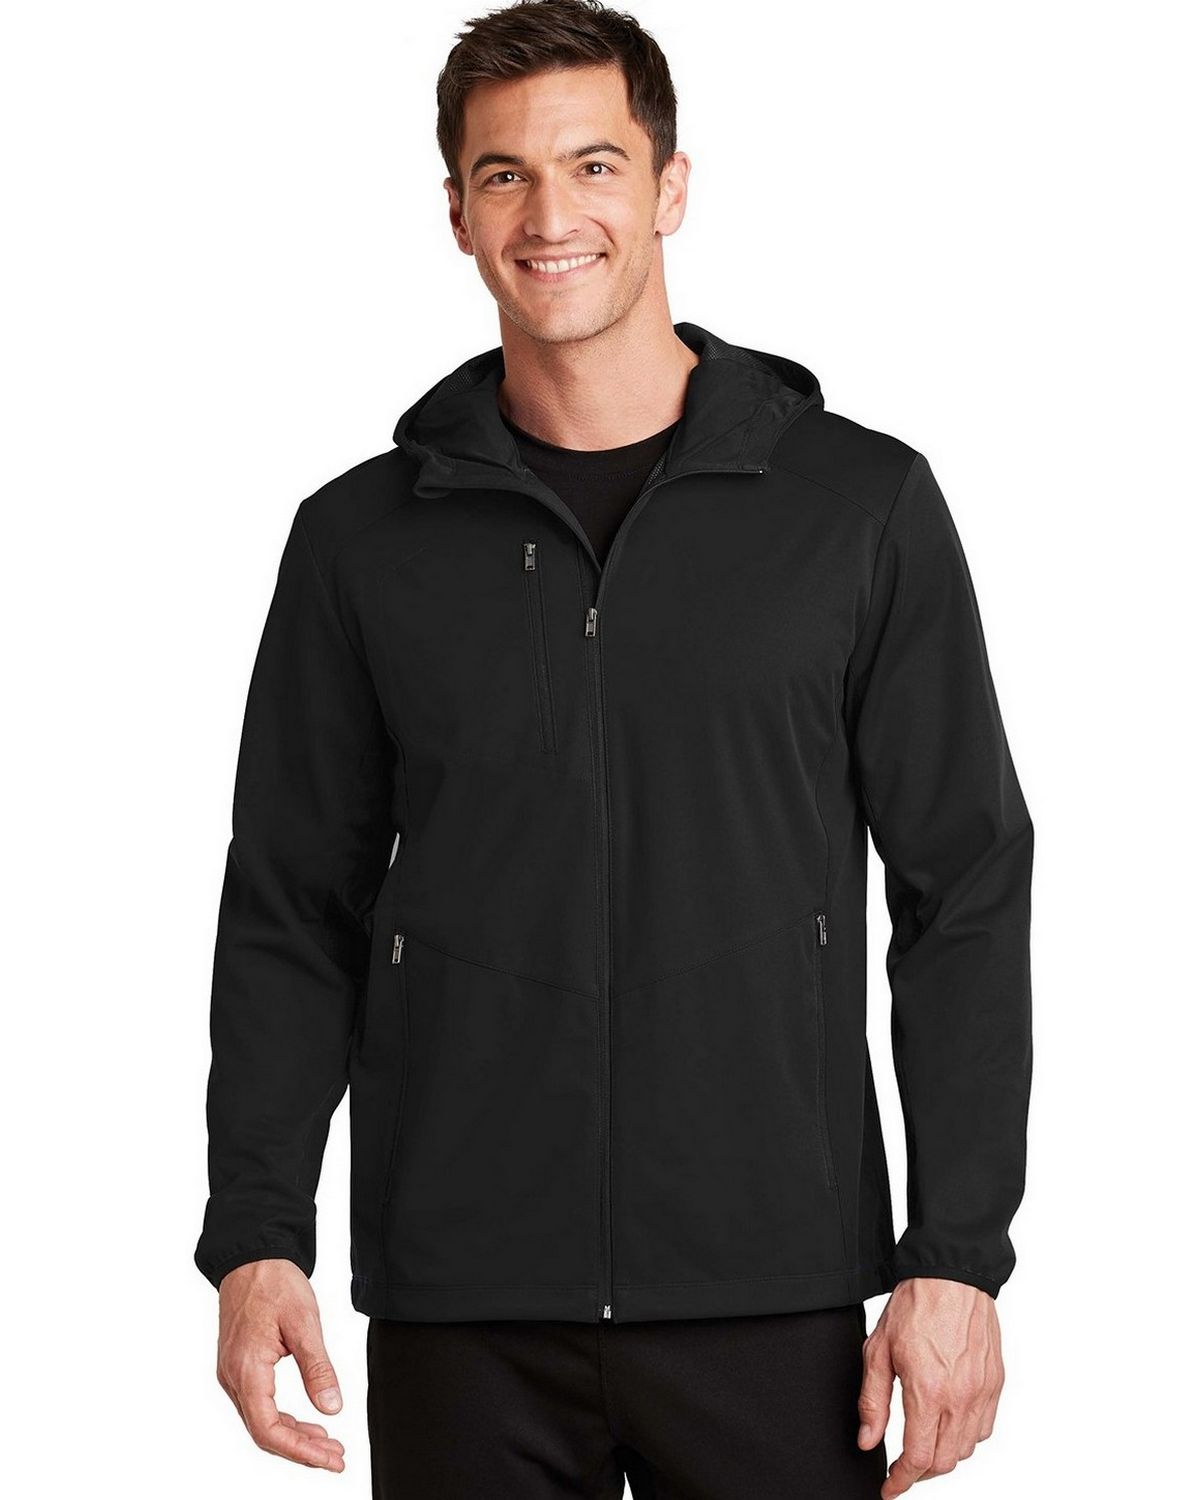 Size Chart for Port Authority J719 Active Hooded Soft Shell Jacket